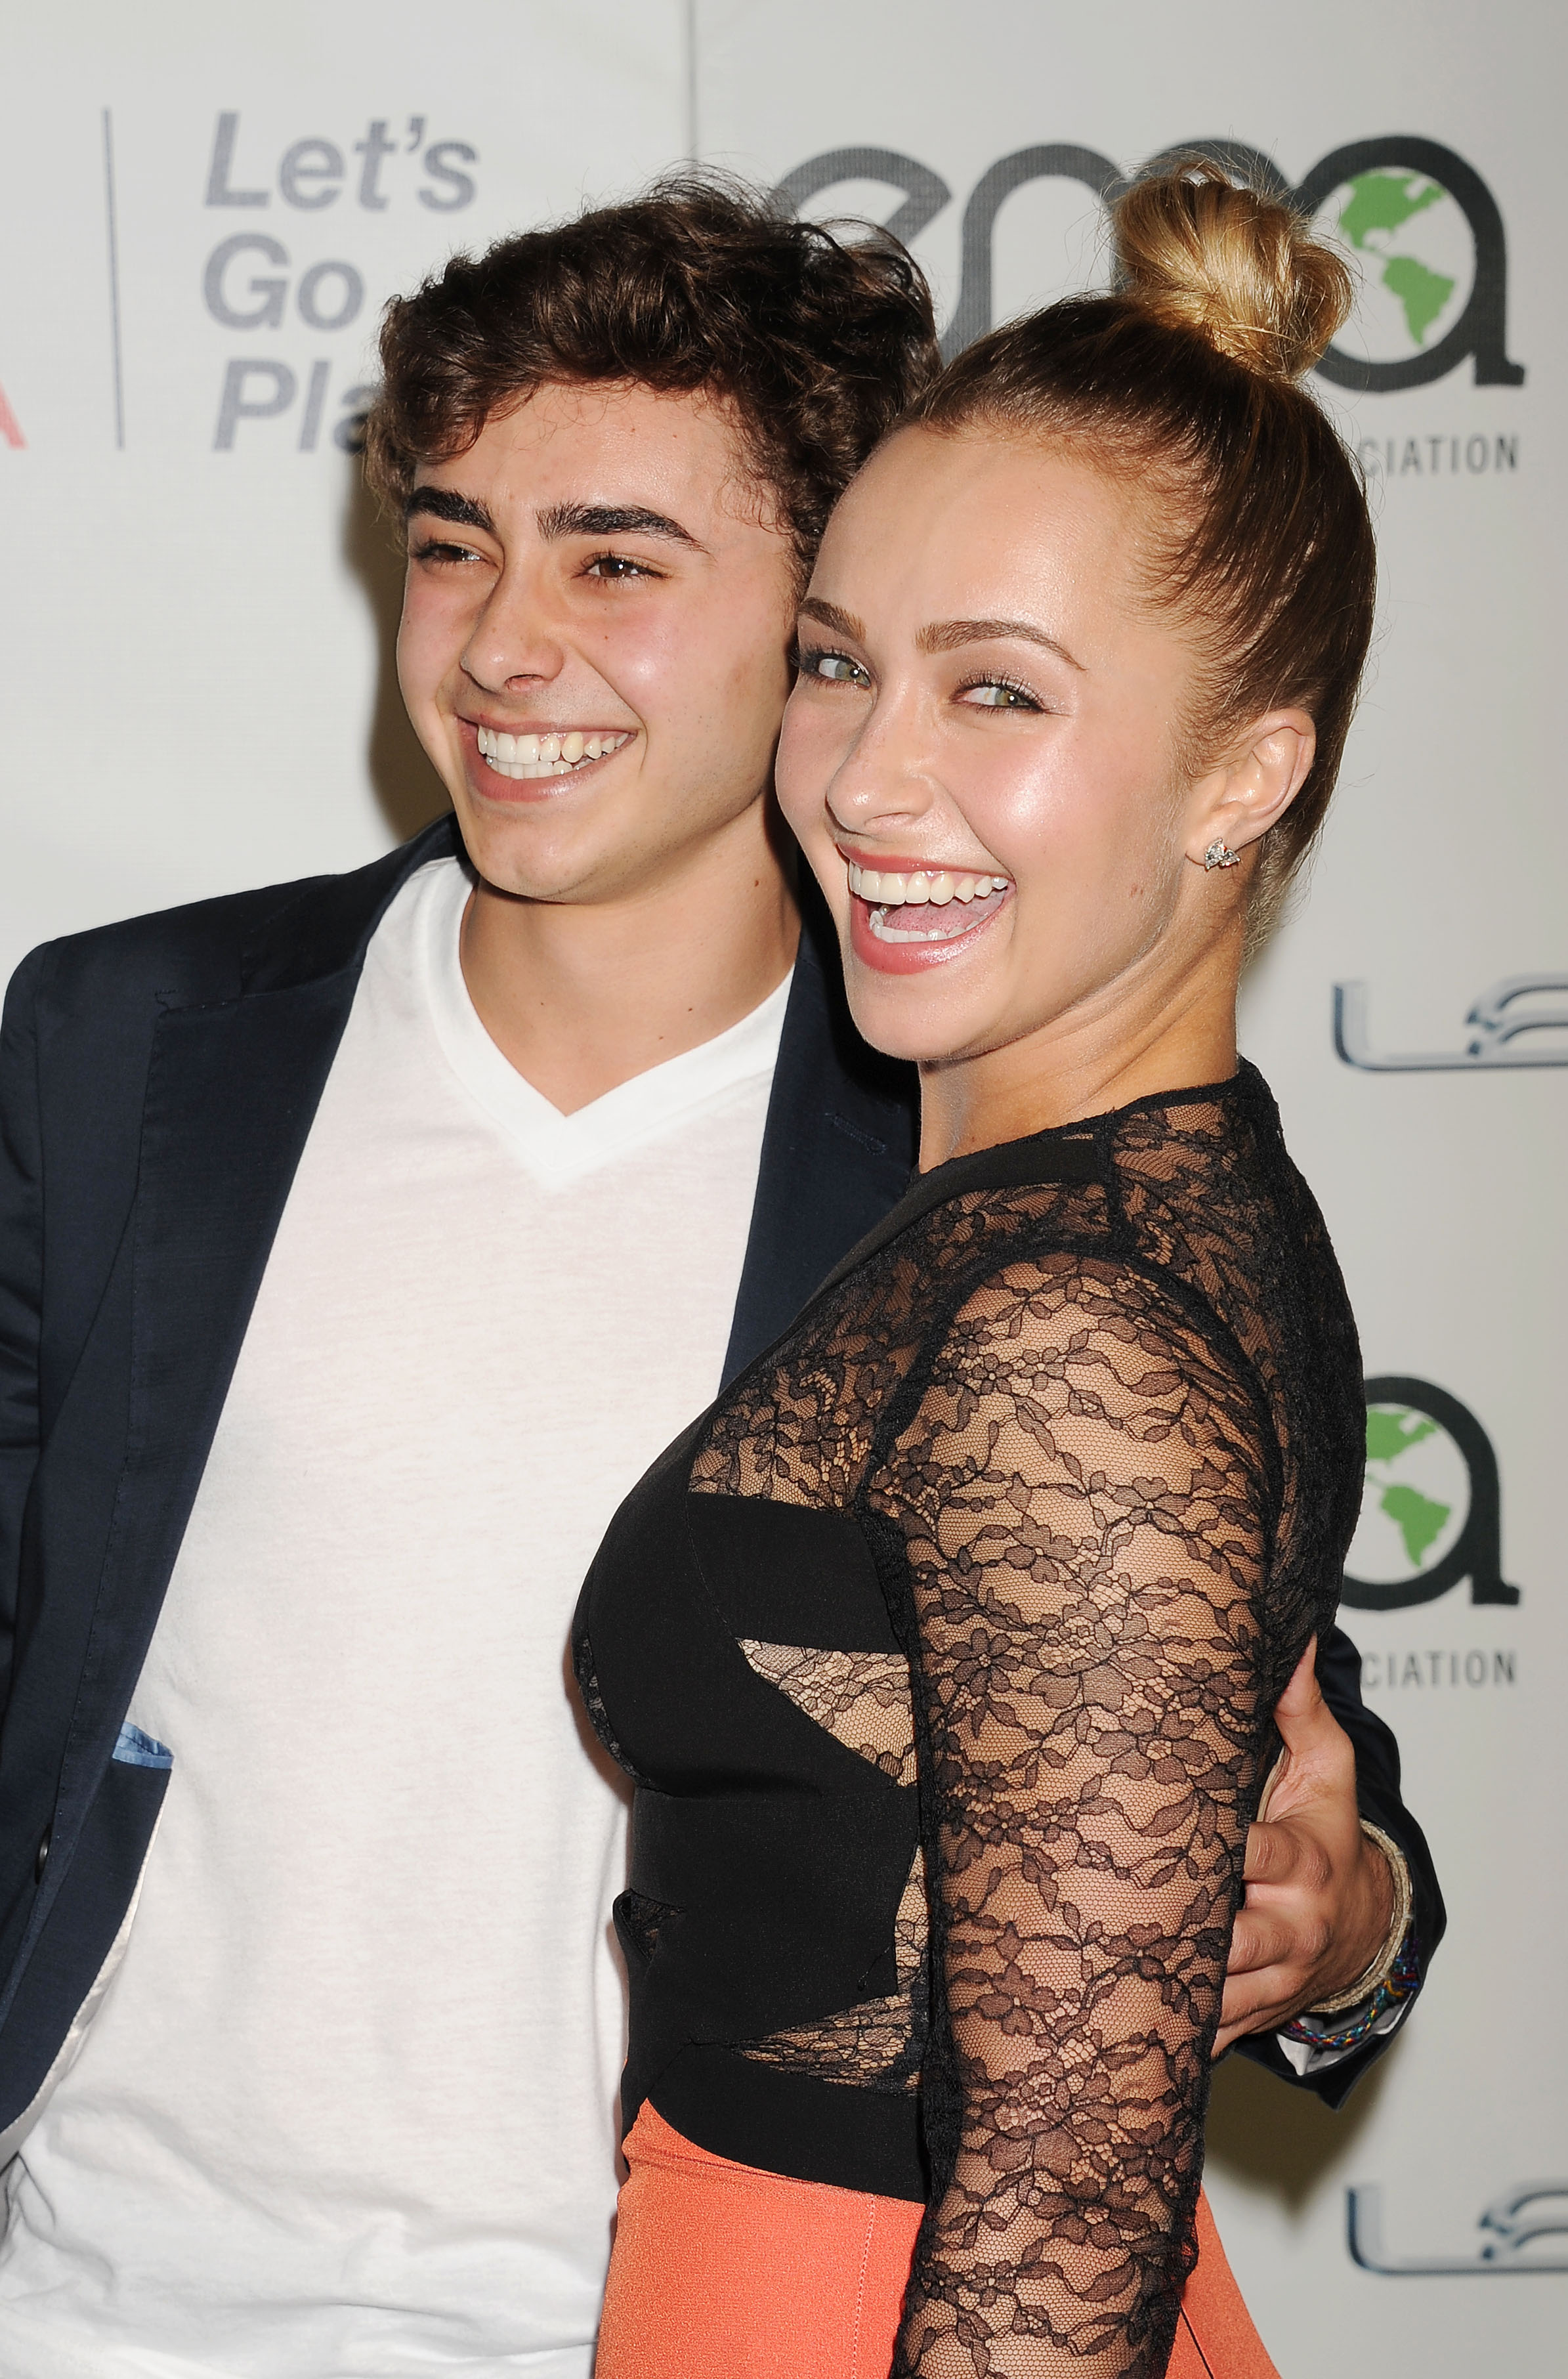 Jansen and Hayden Panettiere at the Environmental Media Awards on October 19, 2013, in Burbank, California | Source: Getty Images